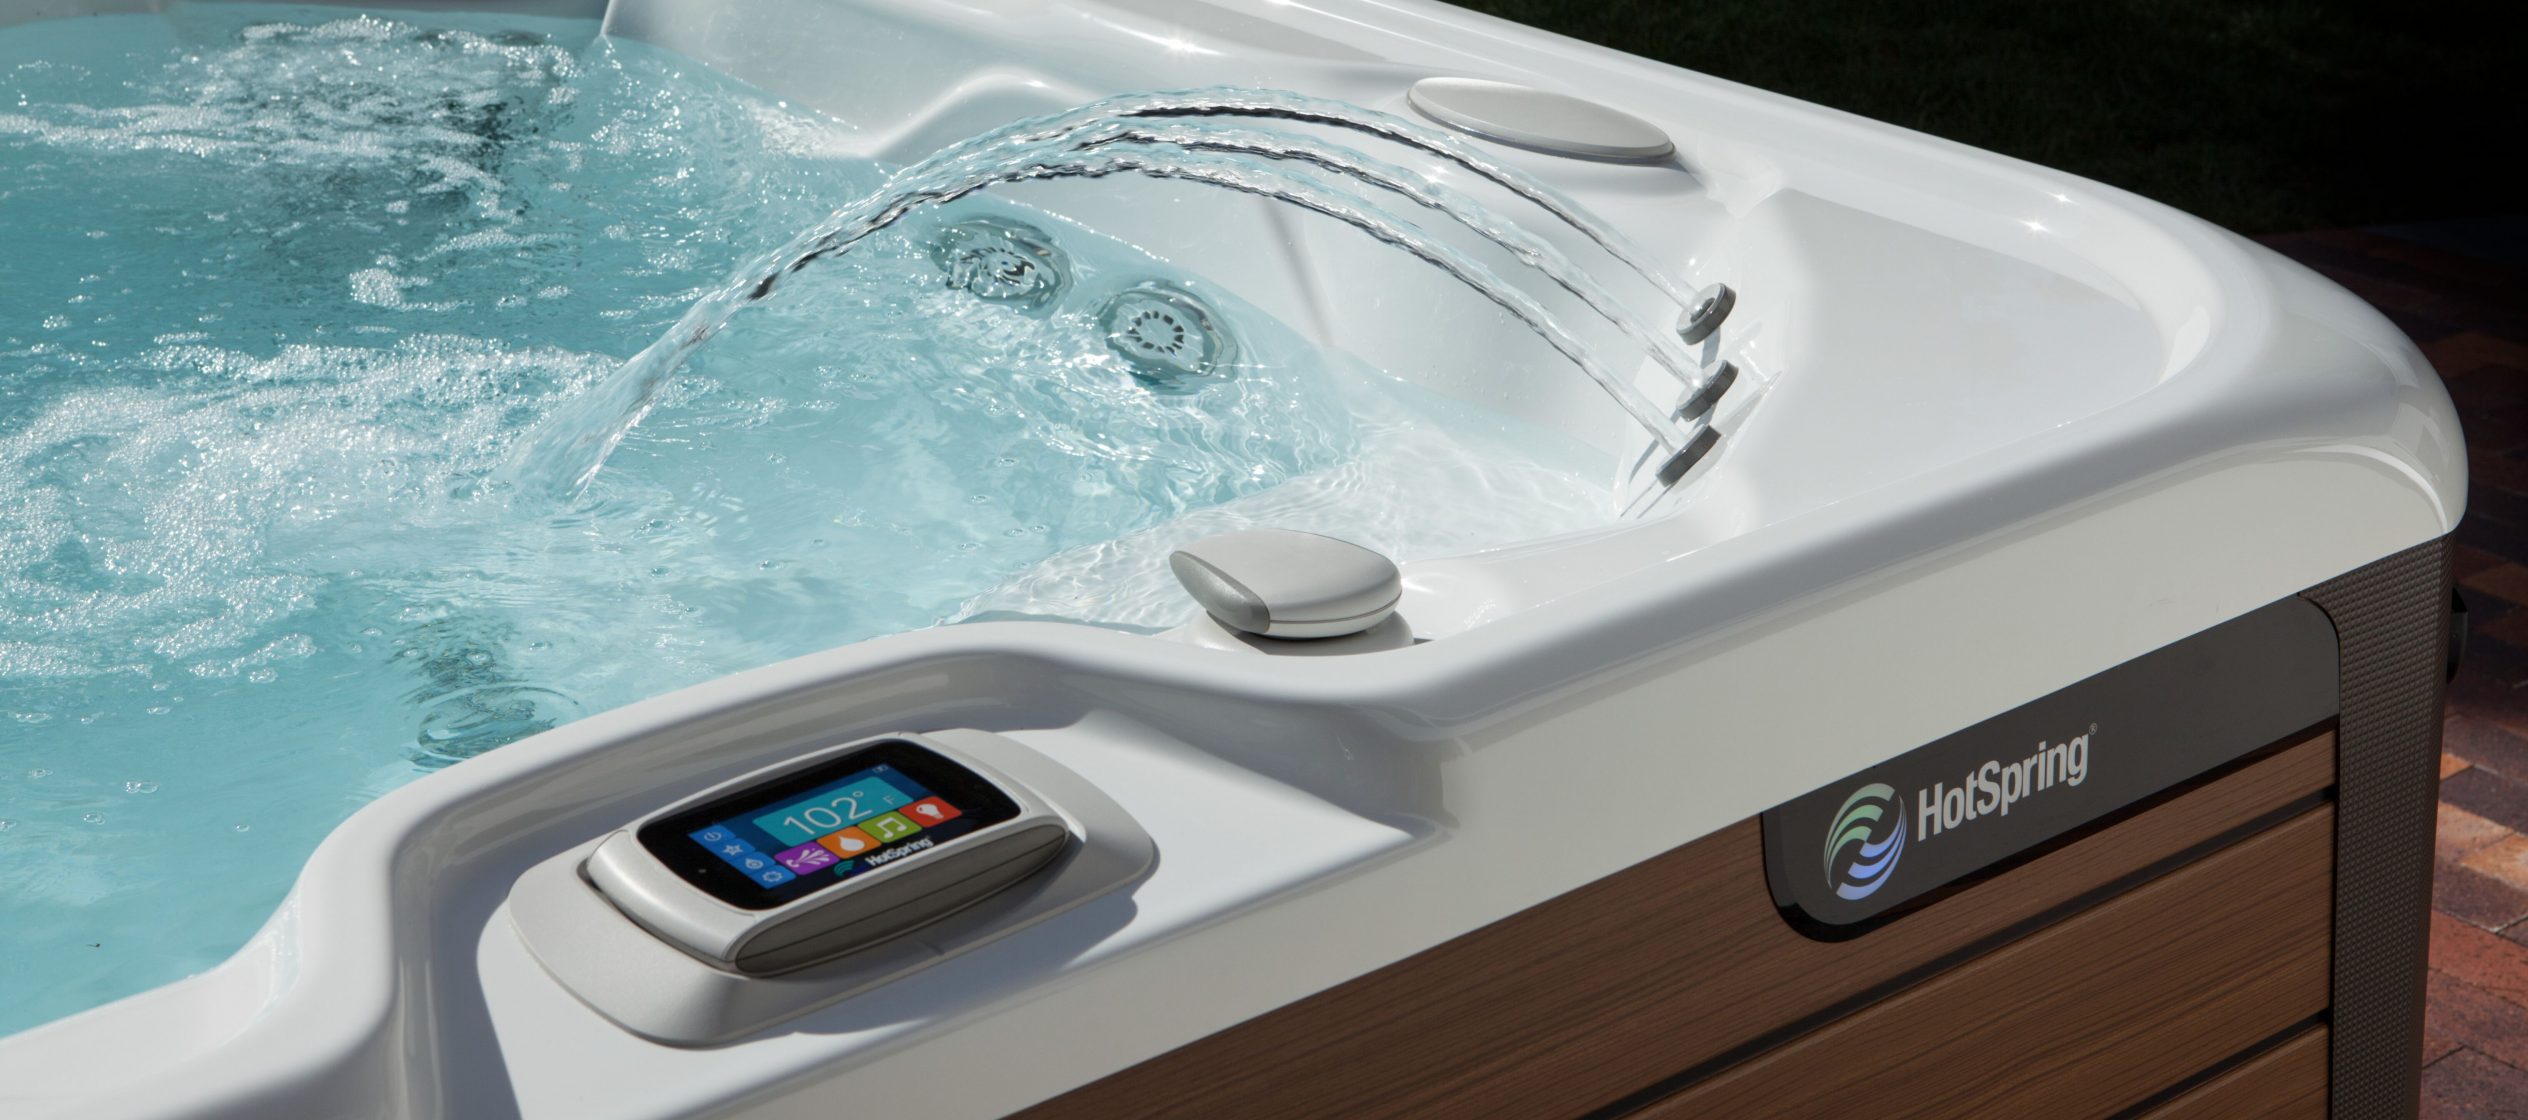 What Should I Know About Installing a Hot Tub Indoors?